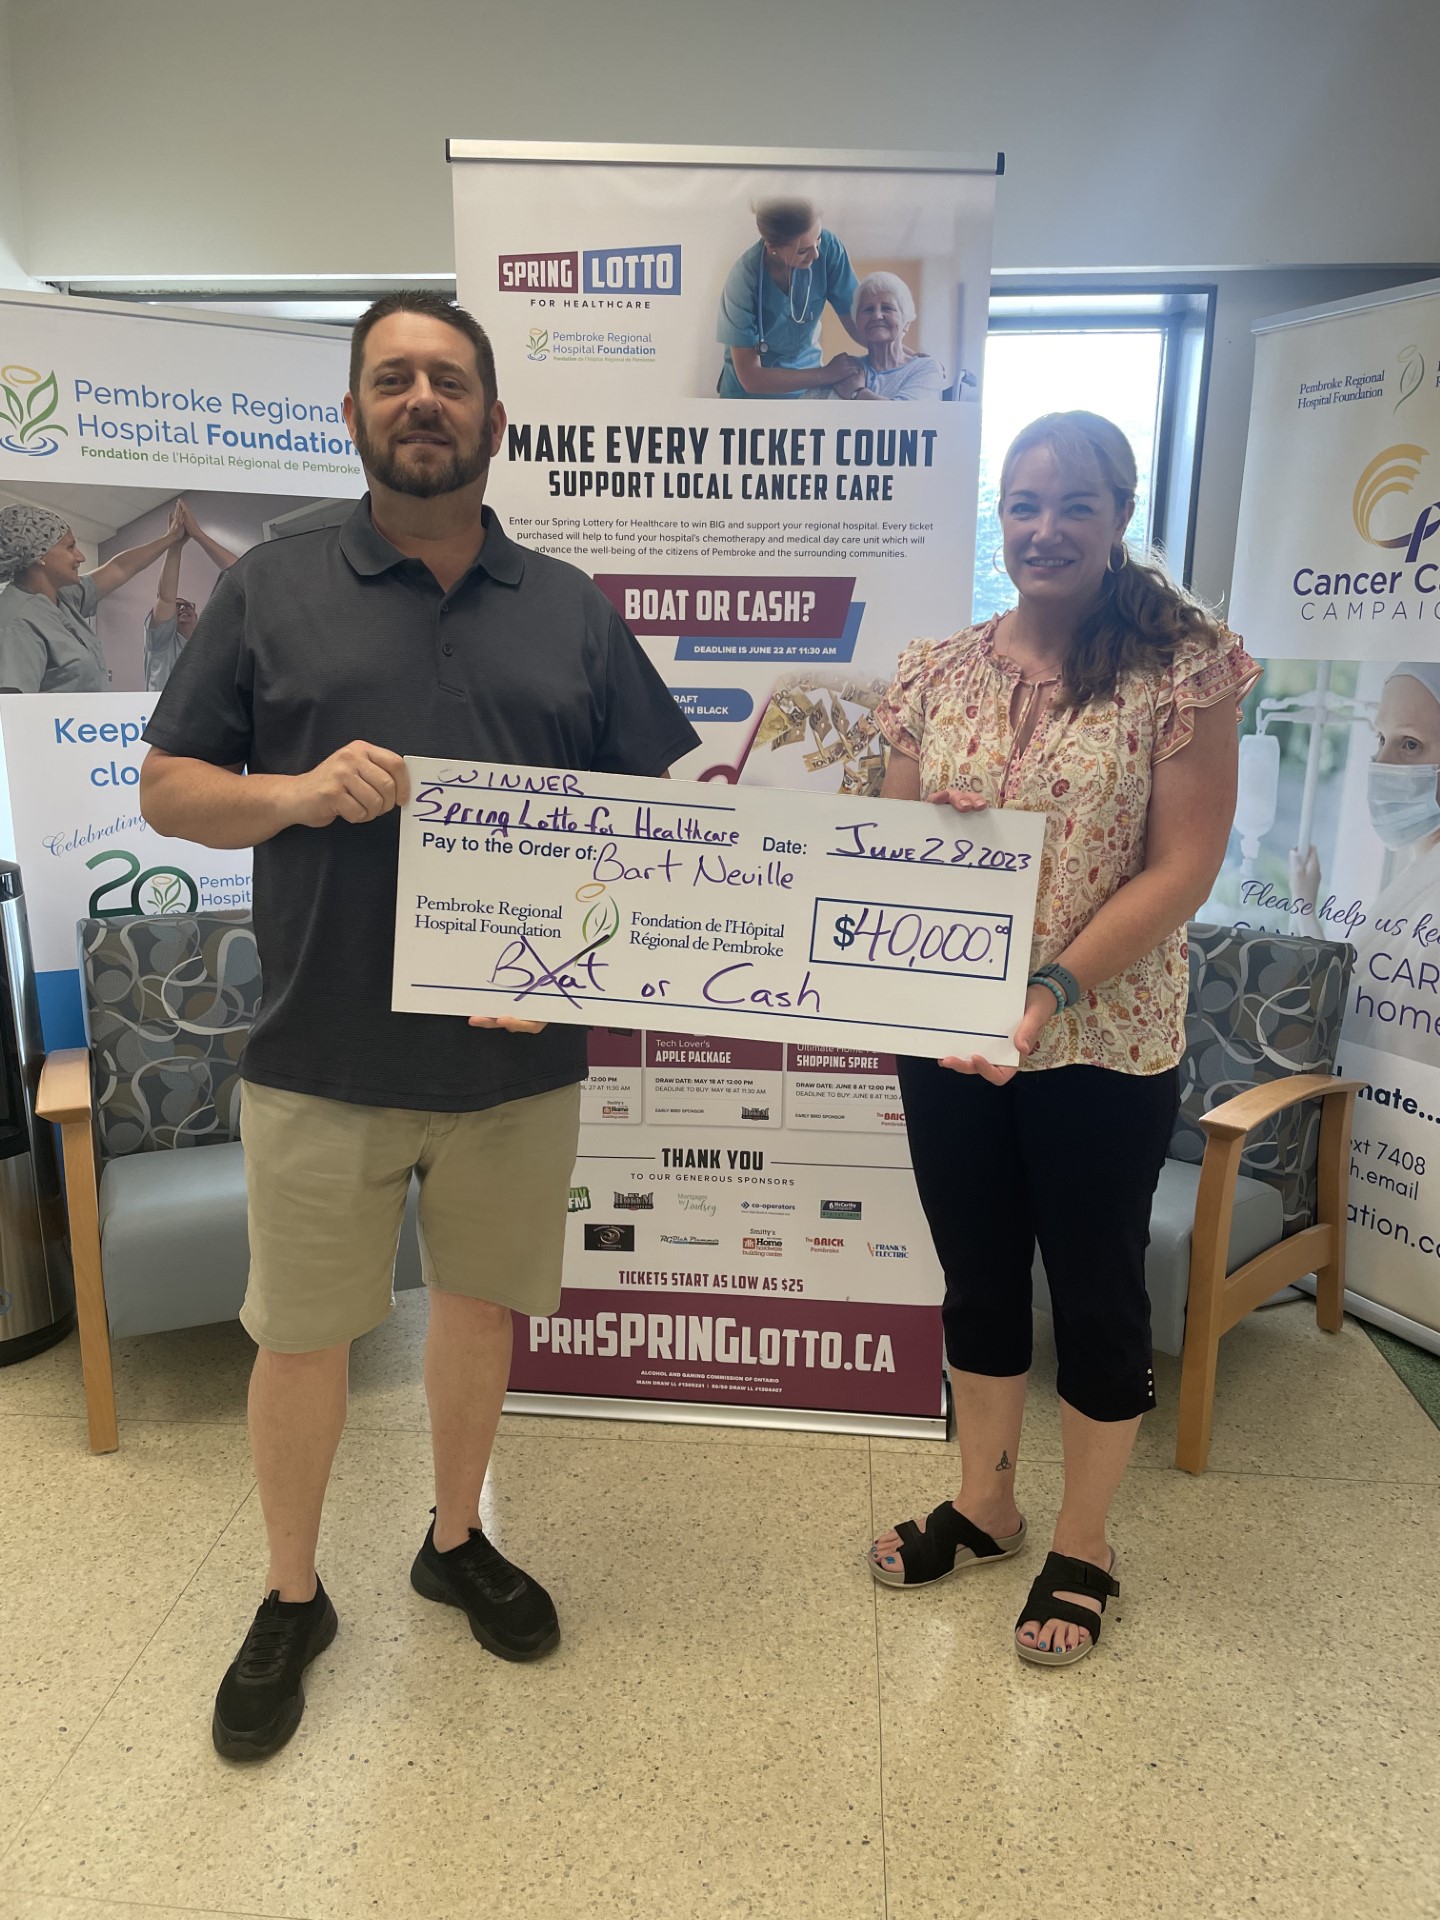 You are currently viewing The Pembroke Regional Hospital Foundation’s 3rd Annual Spring Lotto for Healthcare Announces Winner!